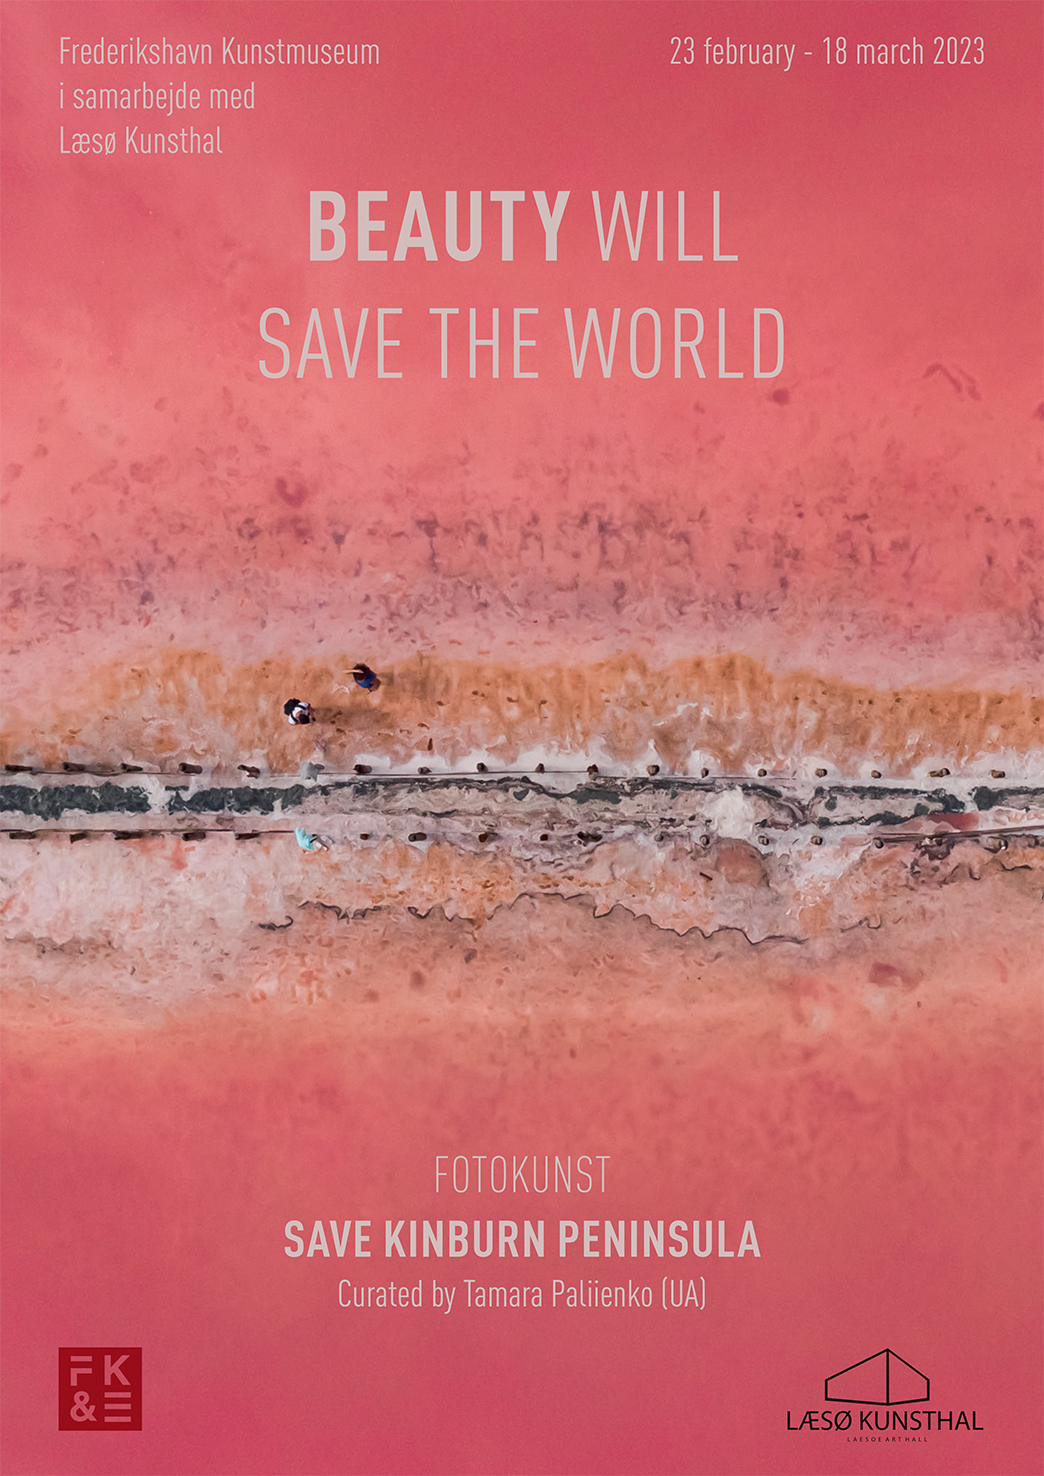 Poster for the exhibition "Beauty Will Save The World", 2023